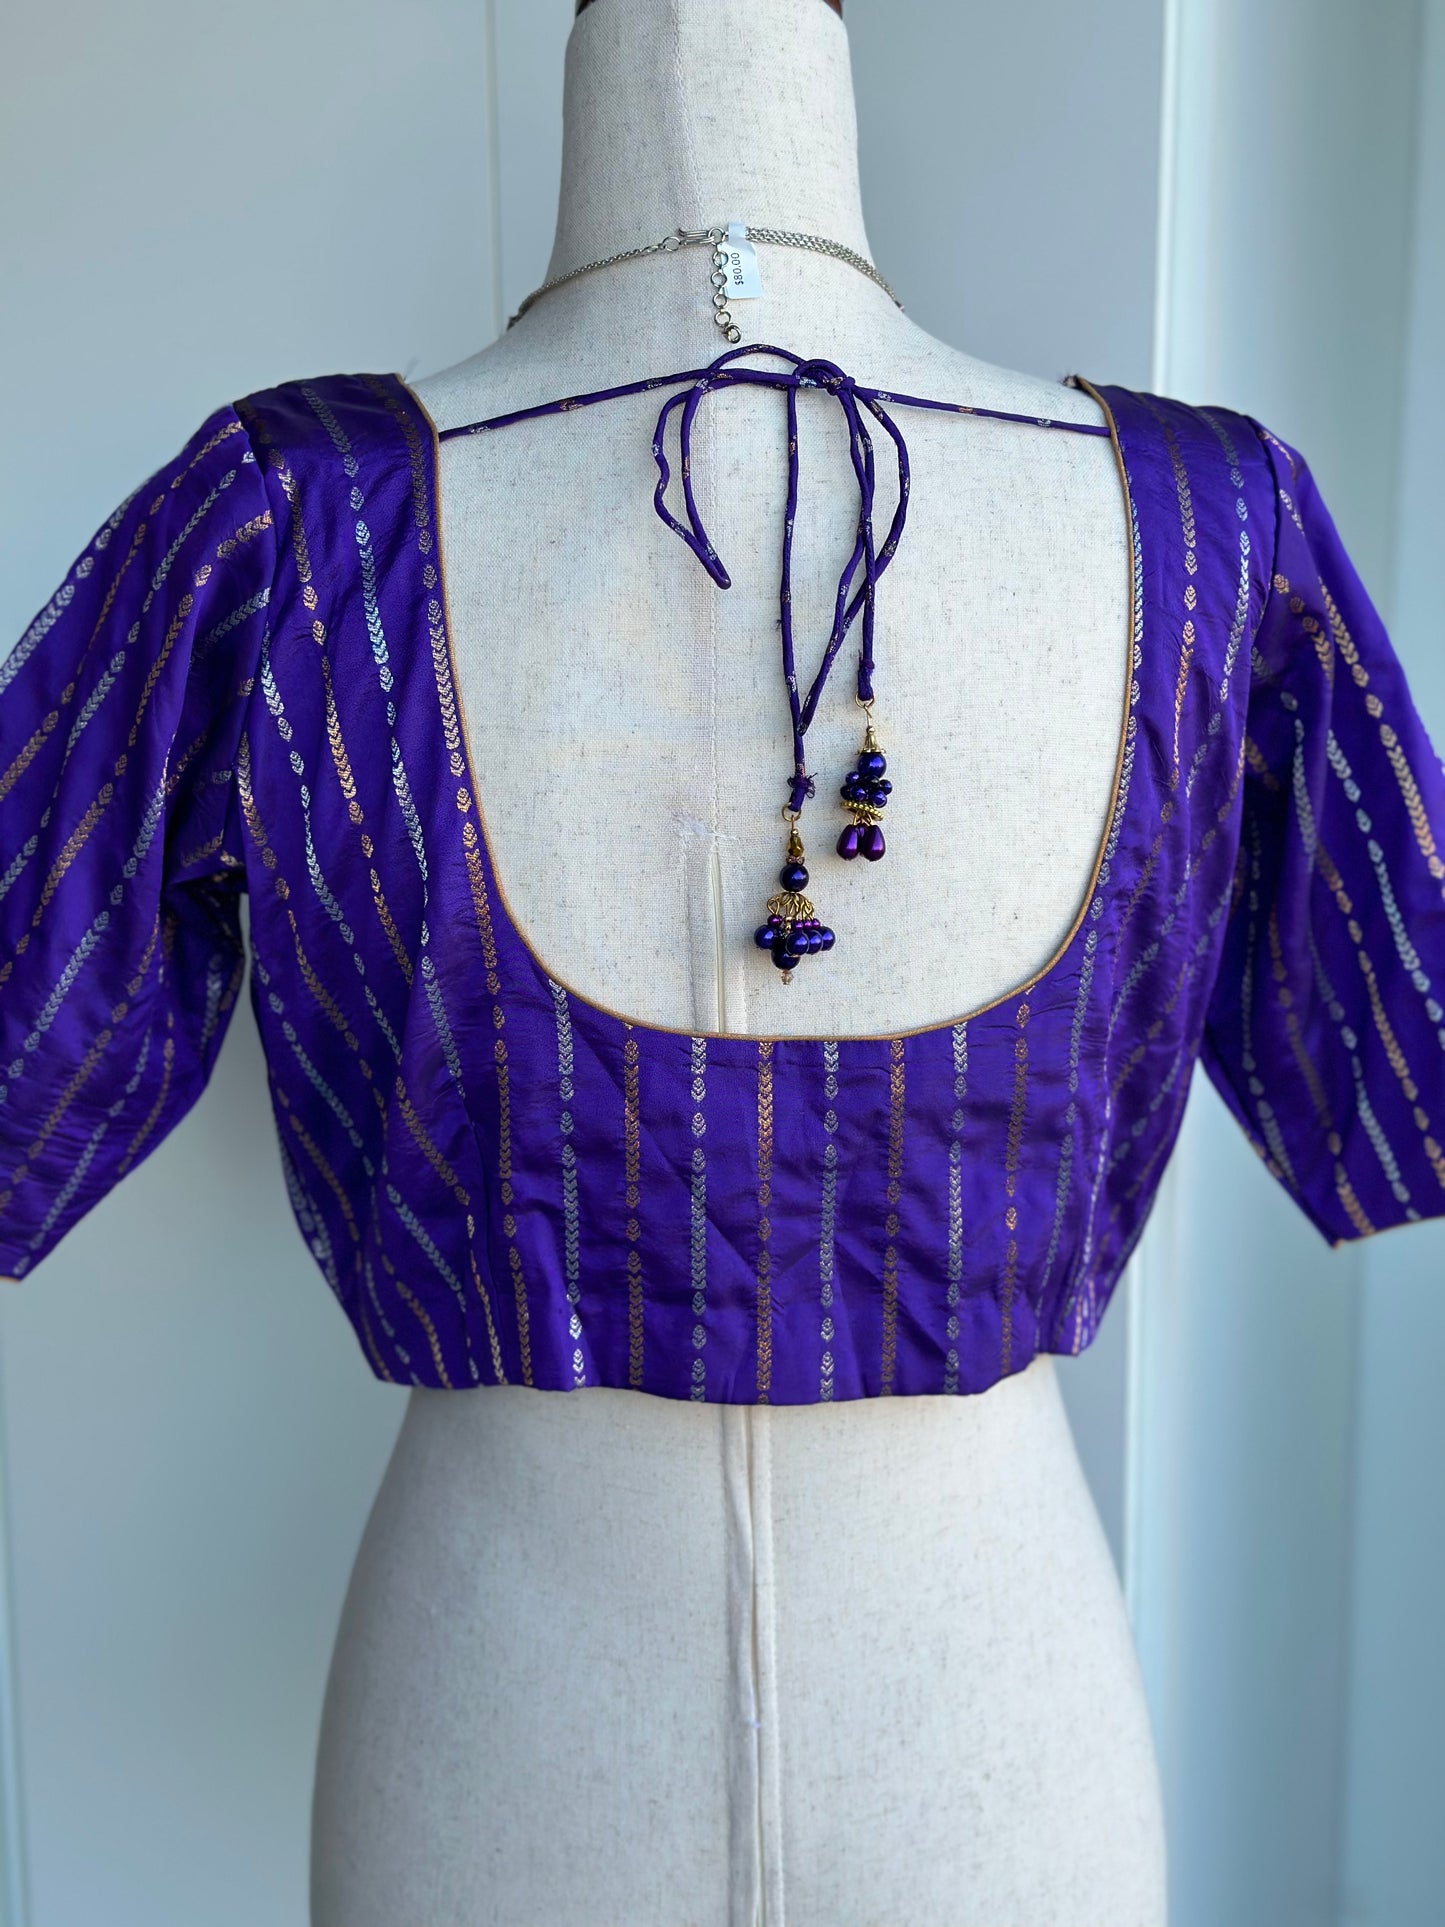 Purple silver & gold brocade blouse | Saree blouses in USA